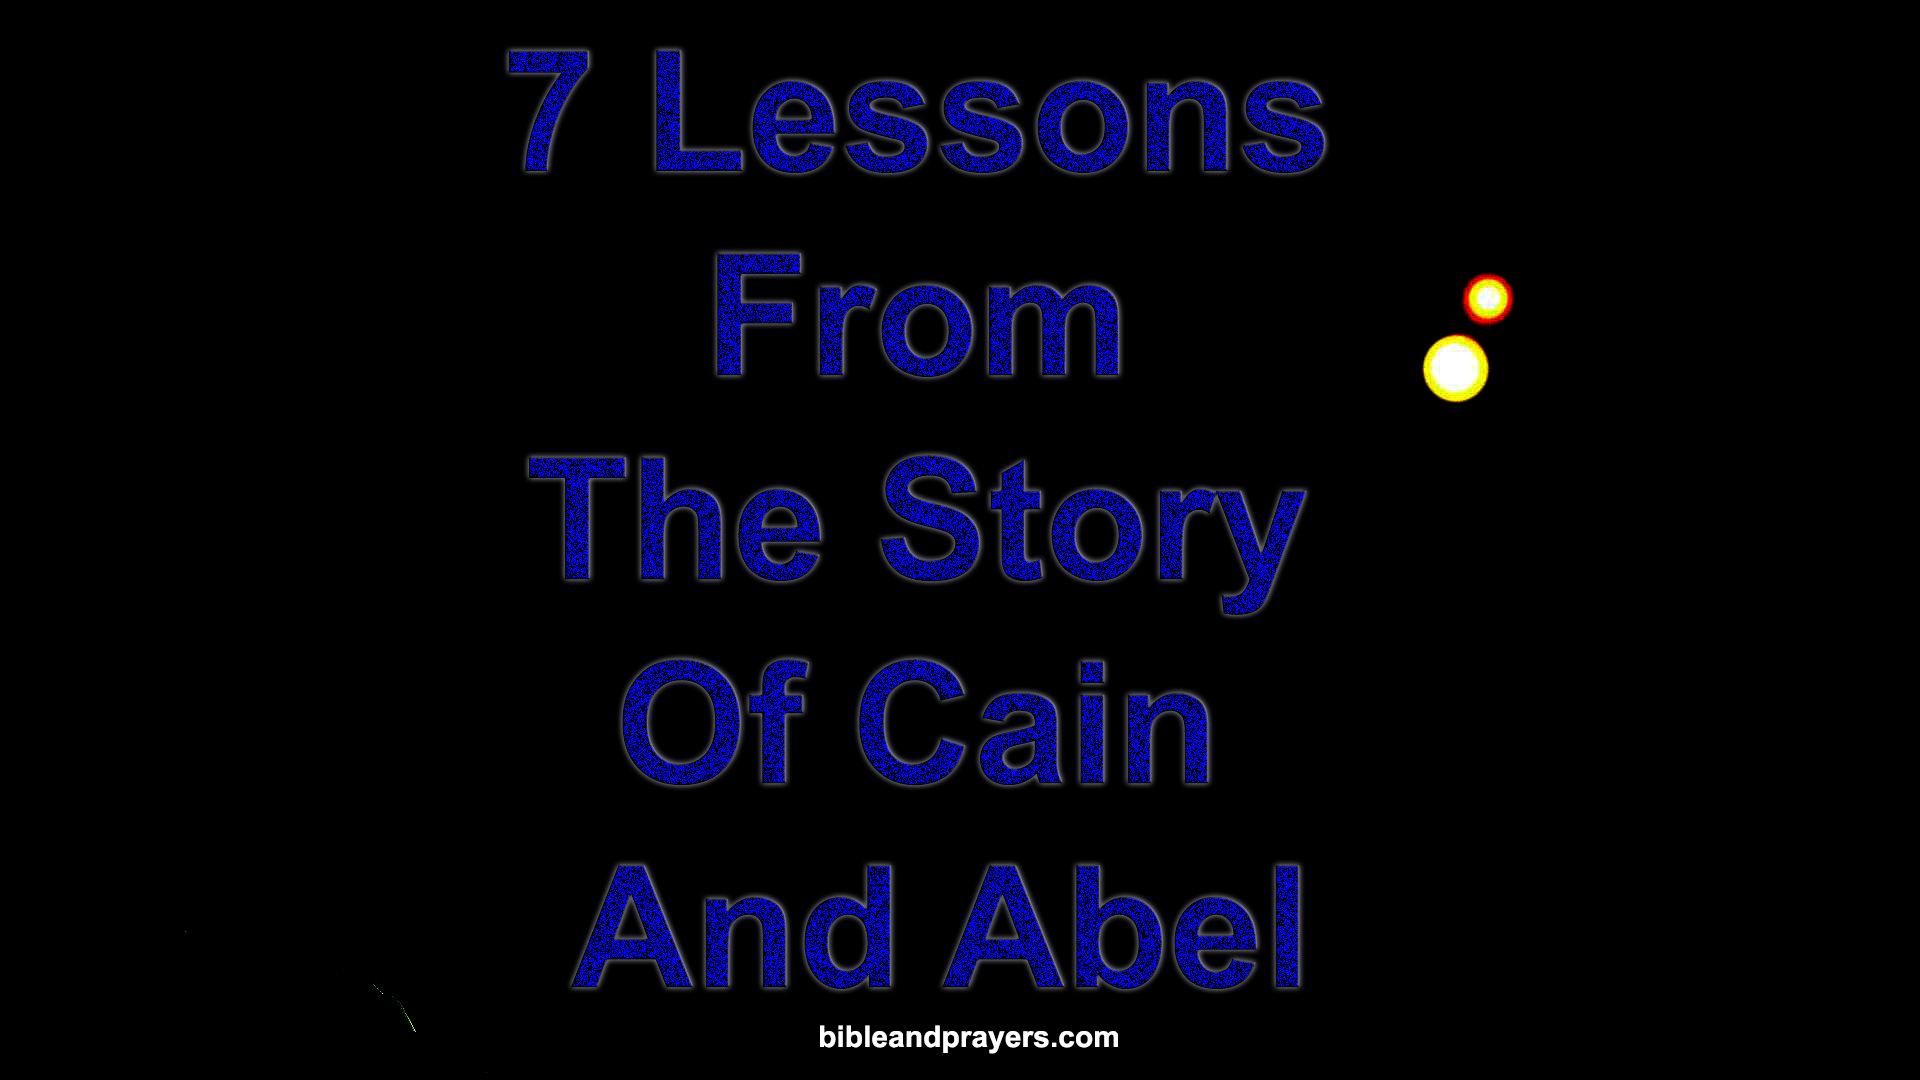 7 Lessons From The Story Of Cain And Abel